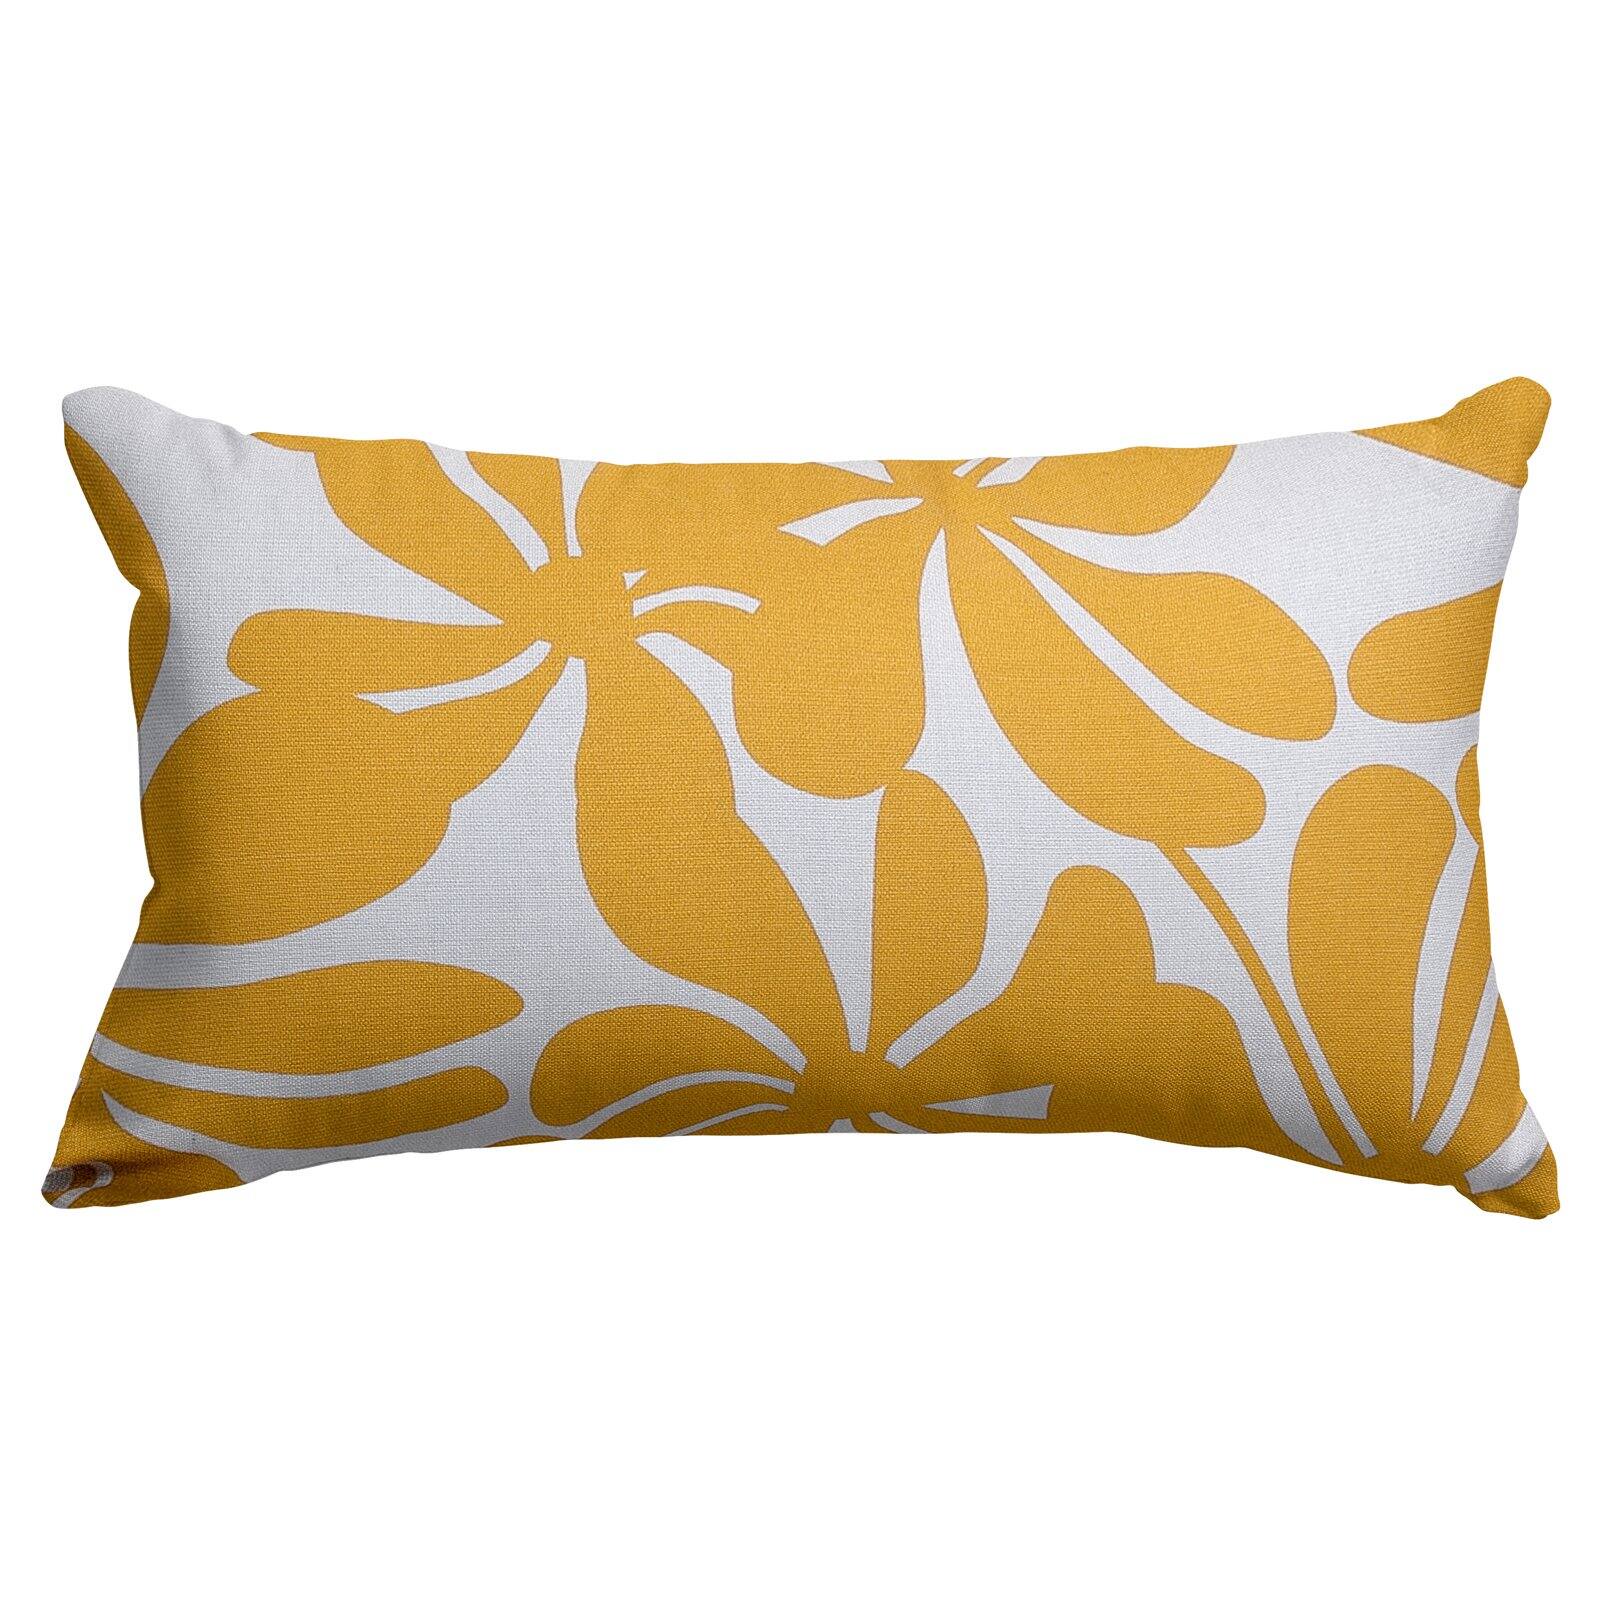 Majestic Home Goods Plantation Indoor / Outdoor Small Pillow - image 1 of 5